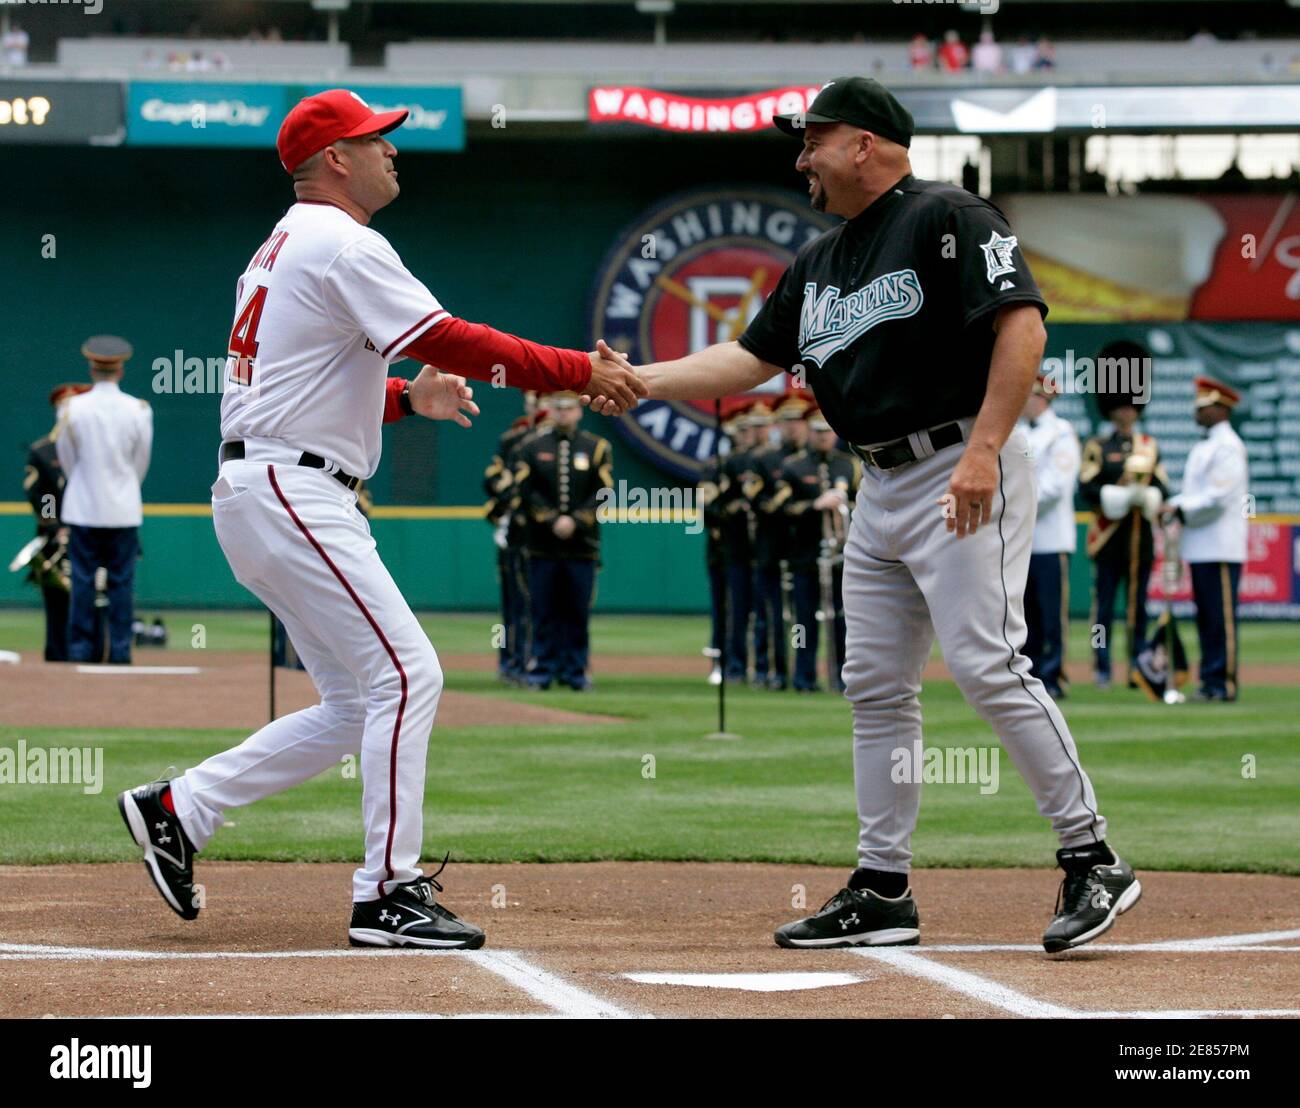 New major league managers Manny Acta (L) of the Washington Nationals and Florida Marlins manager Fredi Gonzalez shake hands prior to their MLB baseball's Opening Day in Washington April 2, 2007. Gonzalez's team came away with the win.   REUTERS/Gary Cameron  (UNITED STATES) Stock Photo